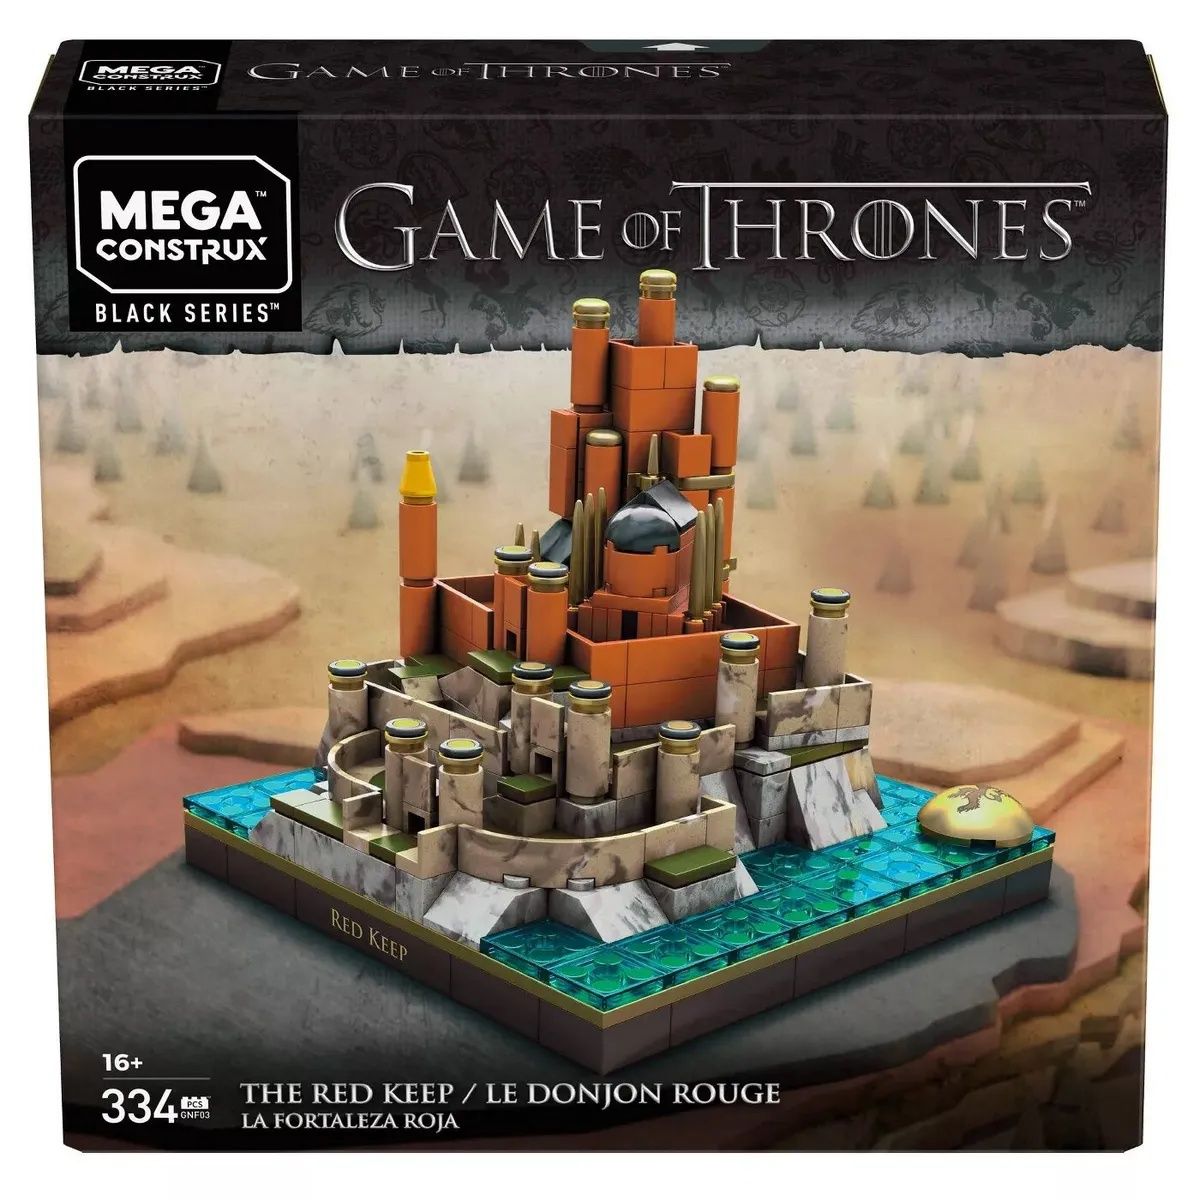 THE RED KEEP mega construx bloks black series GAME OF THRONES